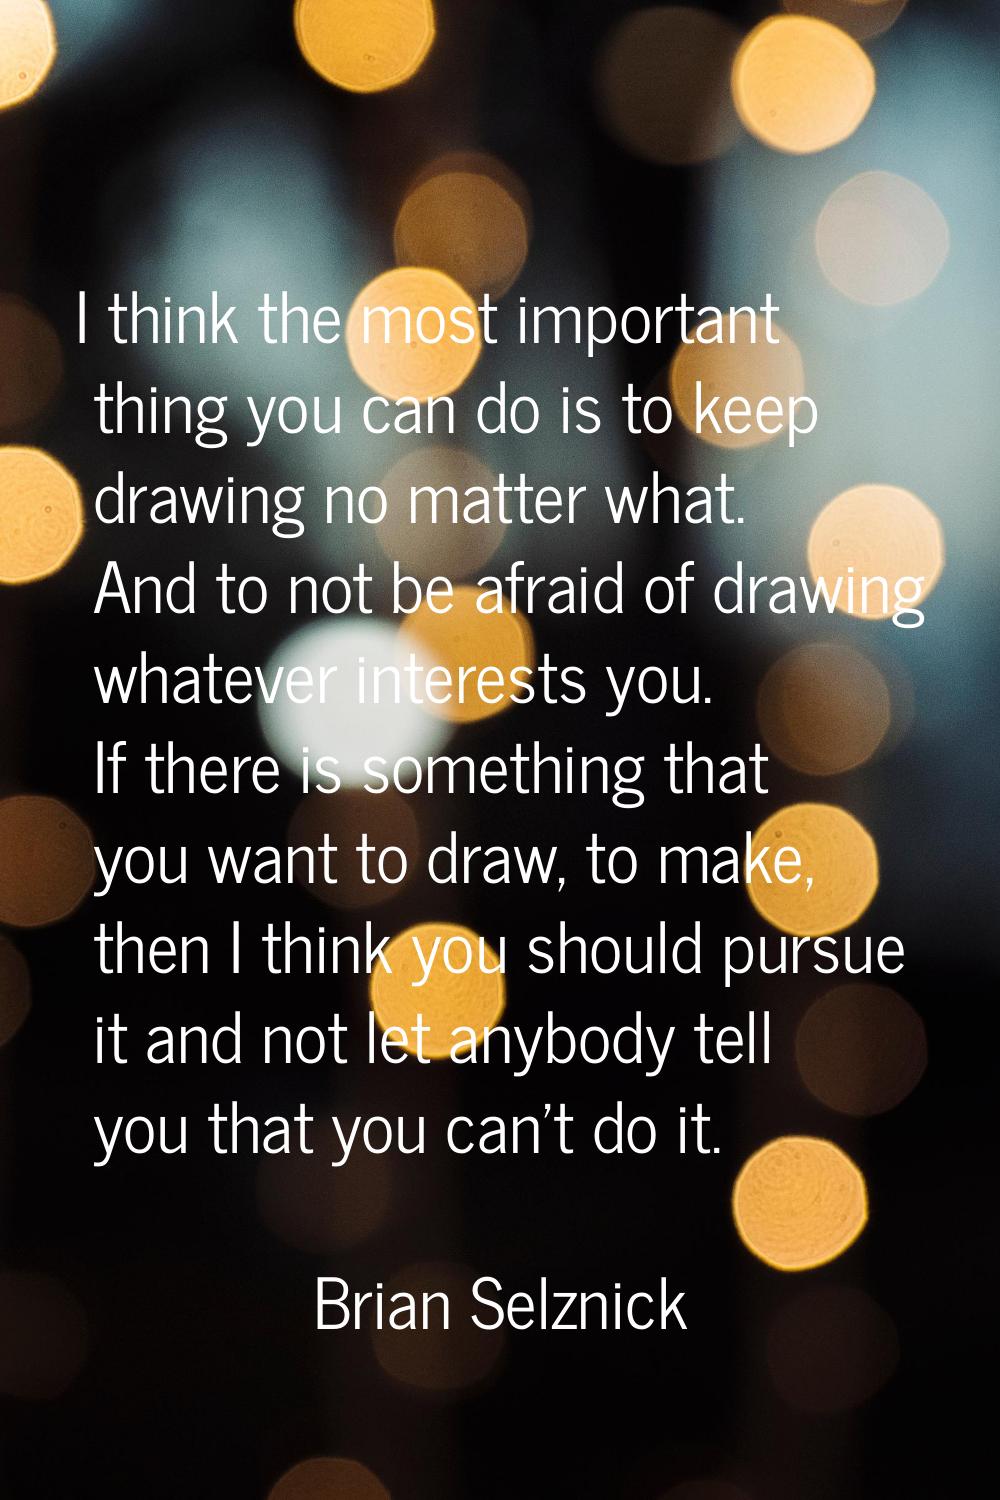 I think the most important thing you can do is to keep drawing no matter what. And to not be afraid